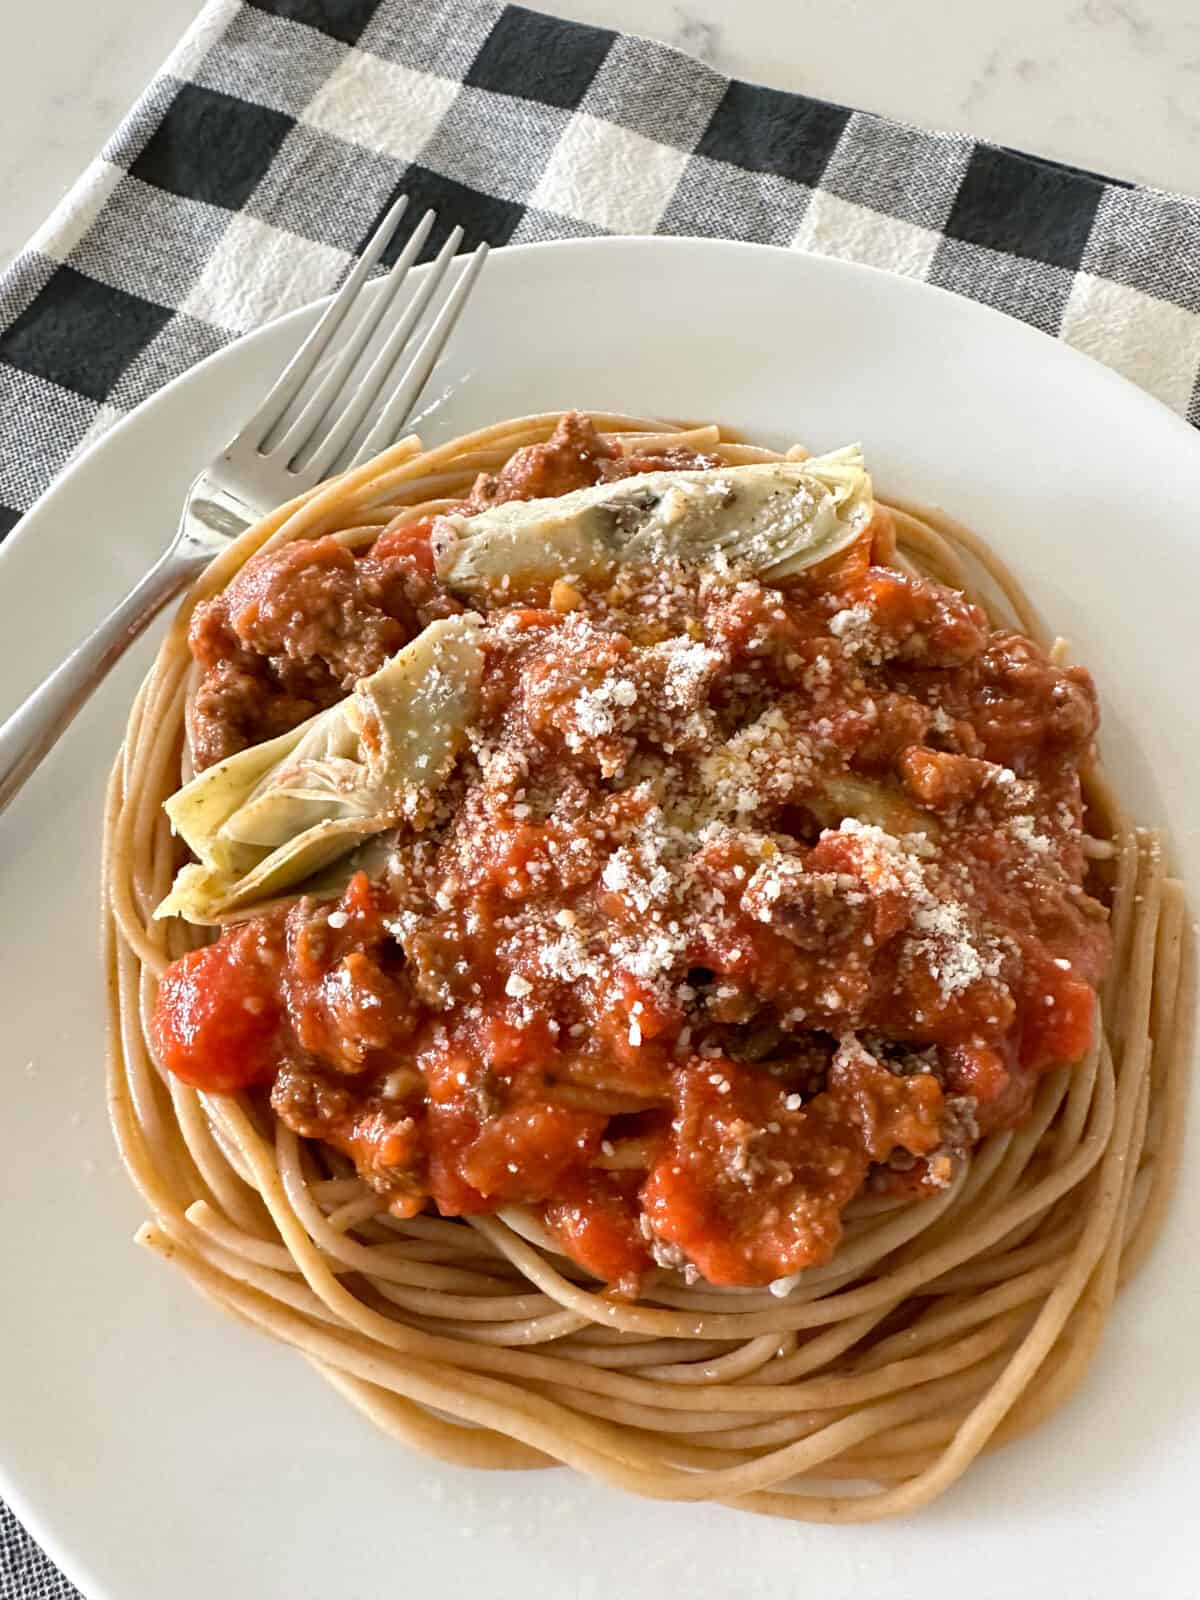 spaghetti and meat sauce over noodles on serving plate